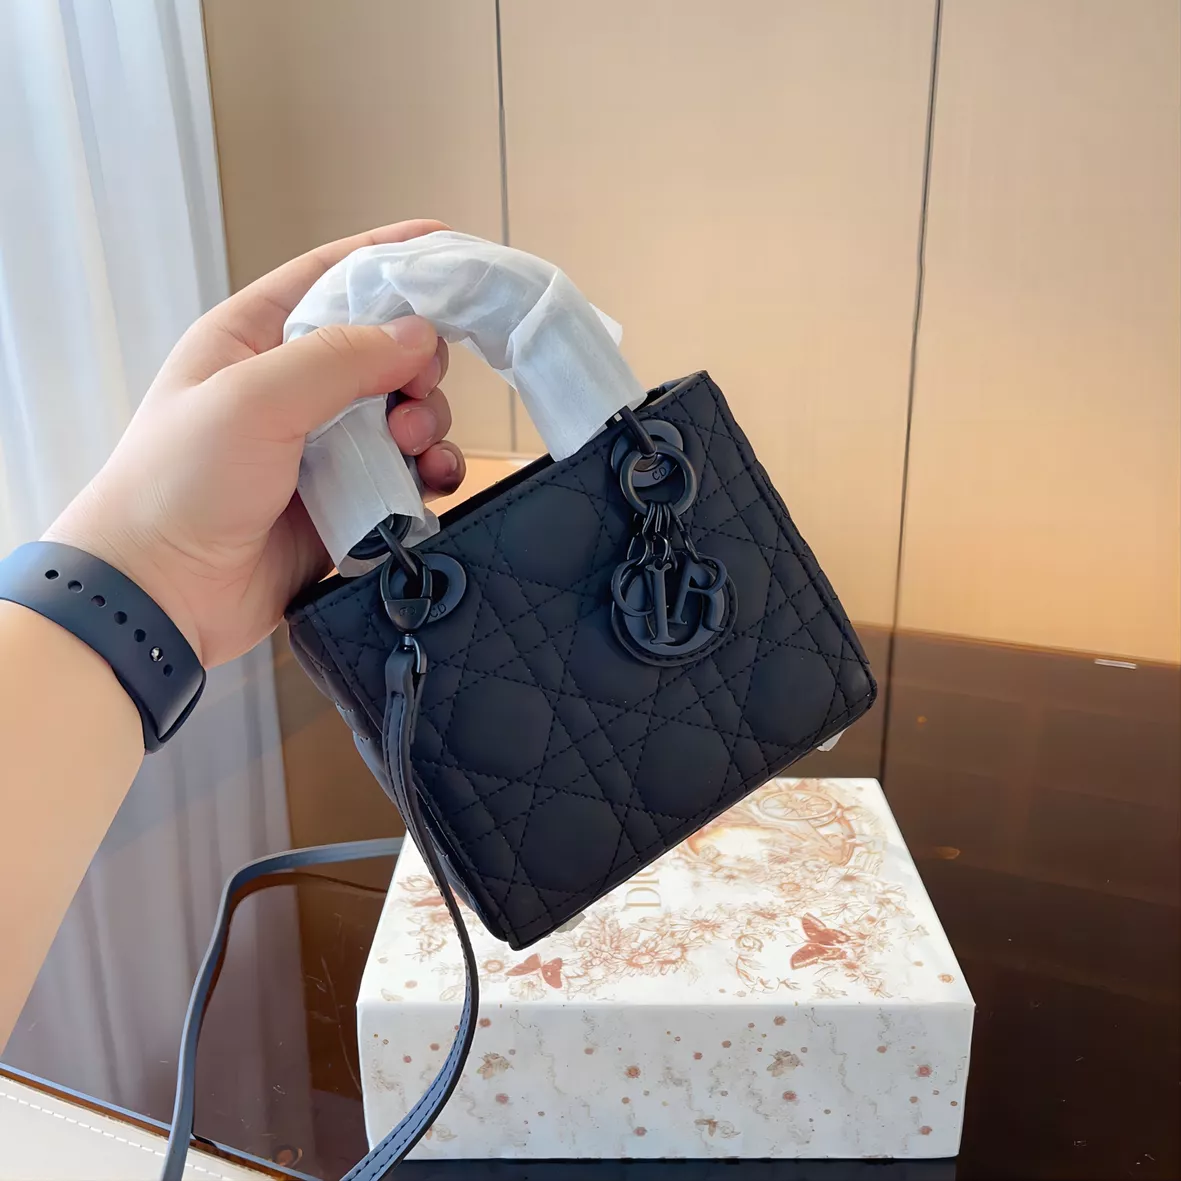 dhgate dior saddle bag, link's in the comments. #dhgate #dhg8